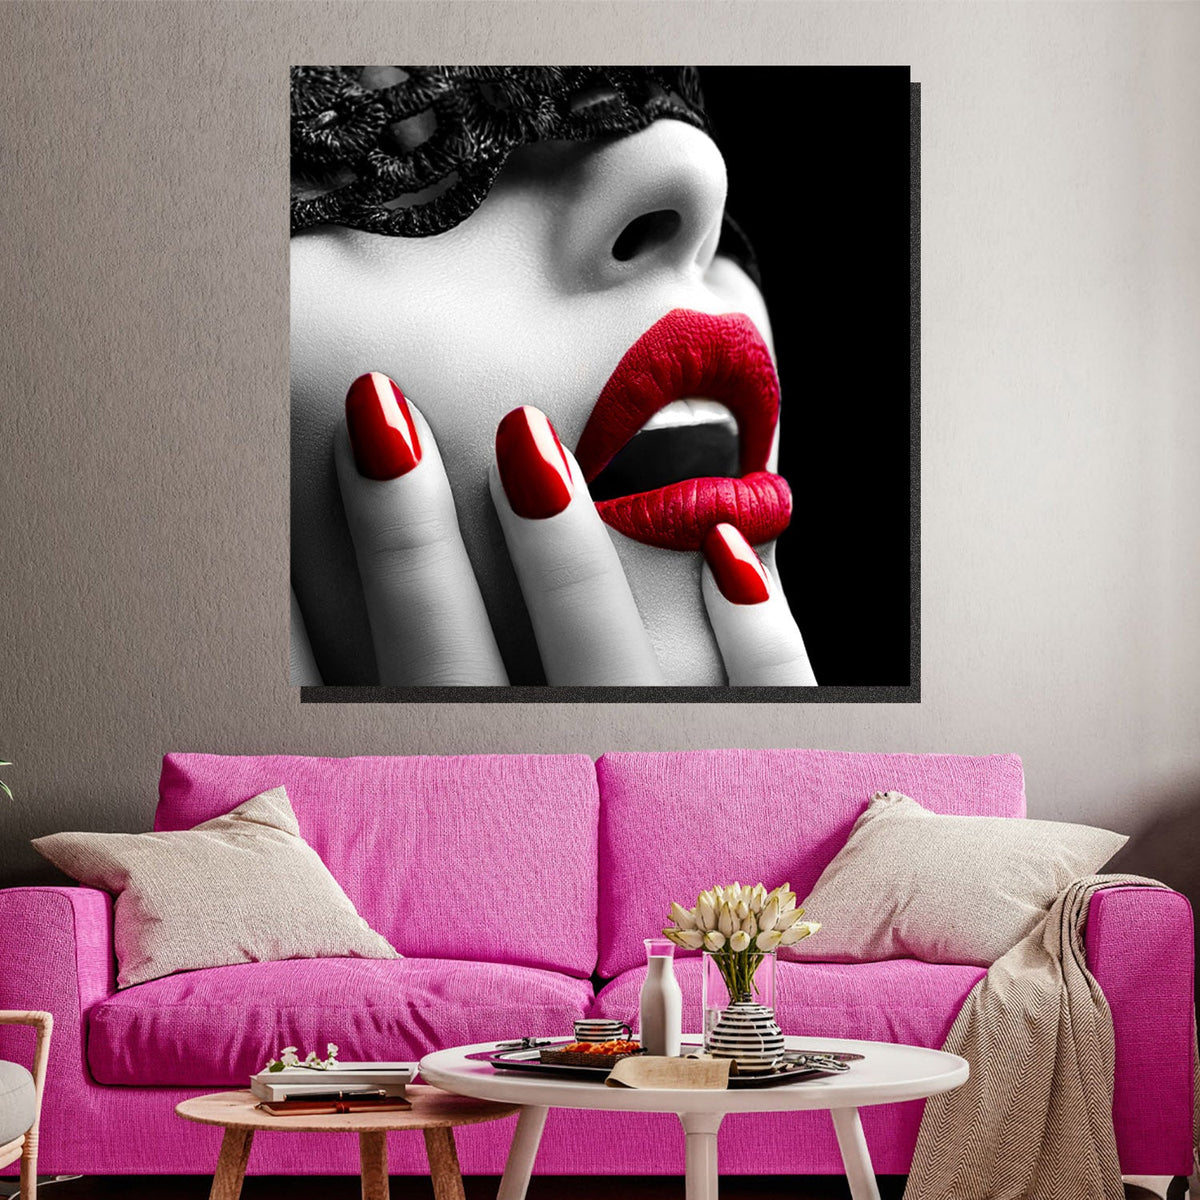 https://cdn.shopify.com/s/files/1/0387/9986/8044/products/ScarlettWomanCanvasArtprintStretched-4.jpg